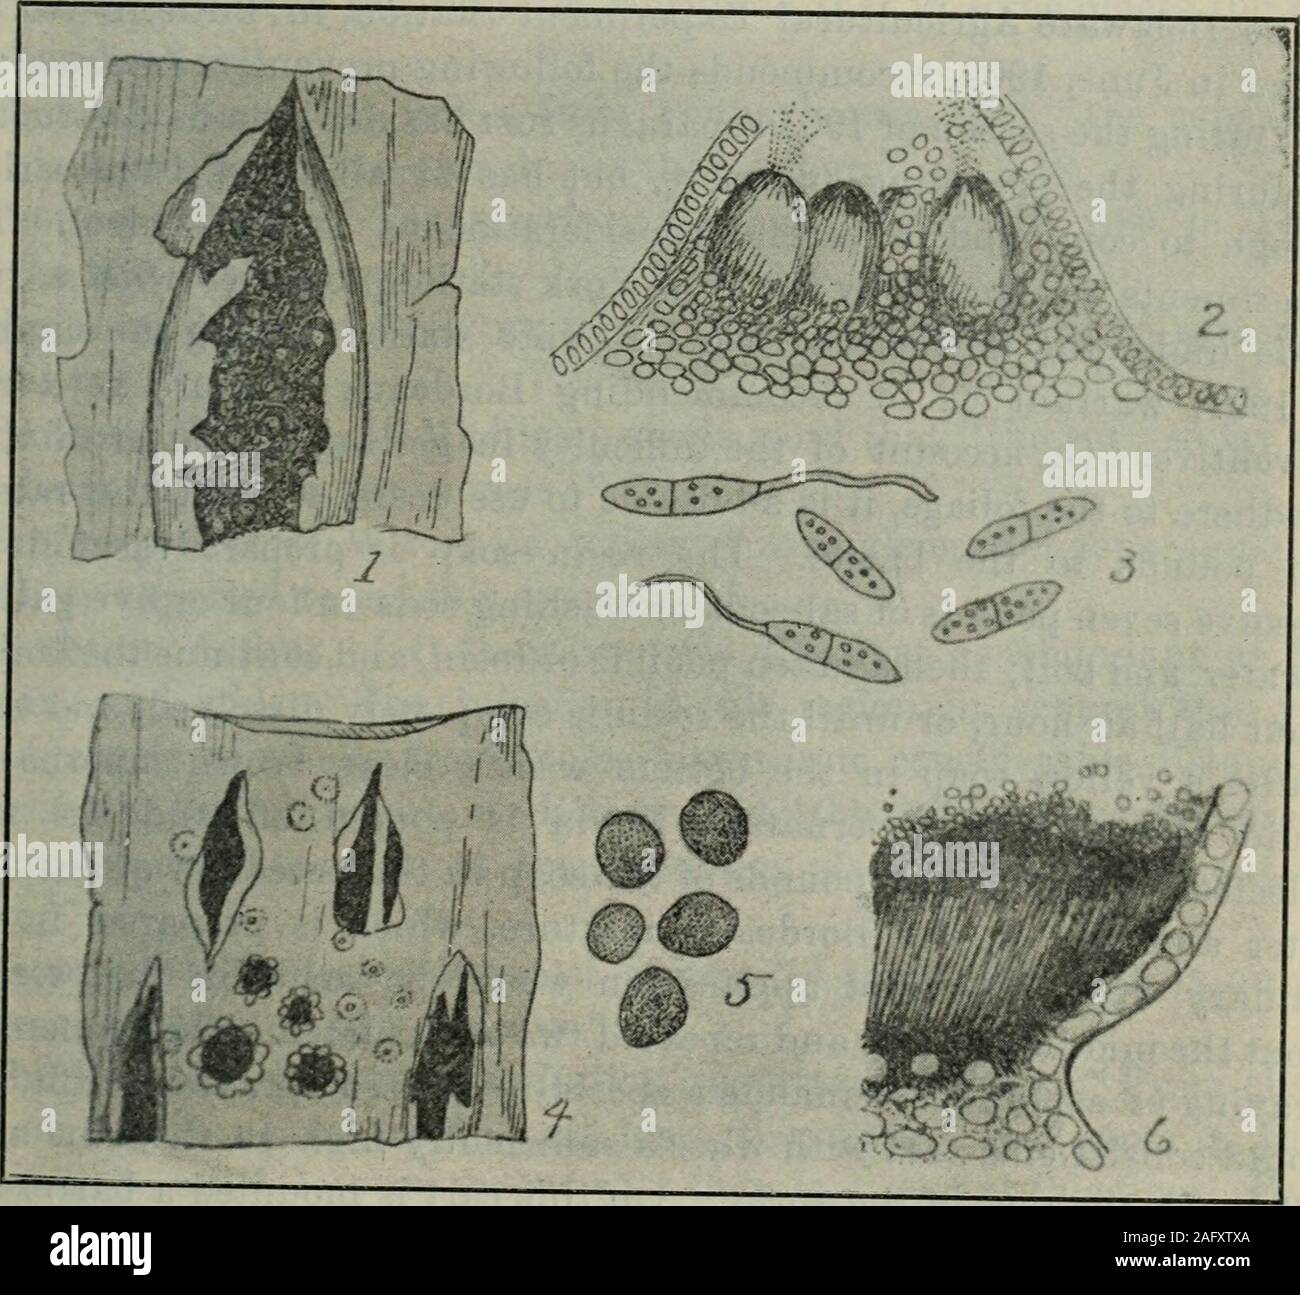 . Appendix to the Journals of the Senate and Assembly of the ... session of the Legislature of the State of California. Figure 2. 1. Credo sorus, with spores and mycelium. 2. Teleuto sorus and teleutospores and mycelium. (After Halsted.). Figure 3. 1,2,3. DarlHca filum: 1. Infected sorus: 2. Cross-section showing pycnidia and spores-3. Spores magnified, two showing germ lubes. 4, 5, 6. Tubercularia persicina: i Parasitein sorus of rust; 5. Spores of parasite, magnified; 6. Section through sorus, showing narasite with spores. (After Halsted.) & f a» 84 REPORT OF STATE BOARD OF HORTICULTURE. cur Stock Photo